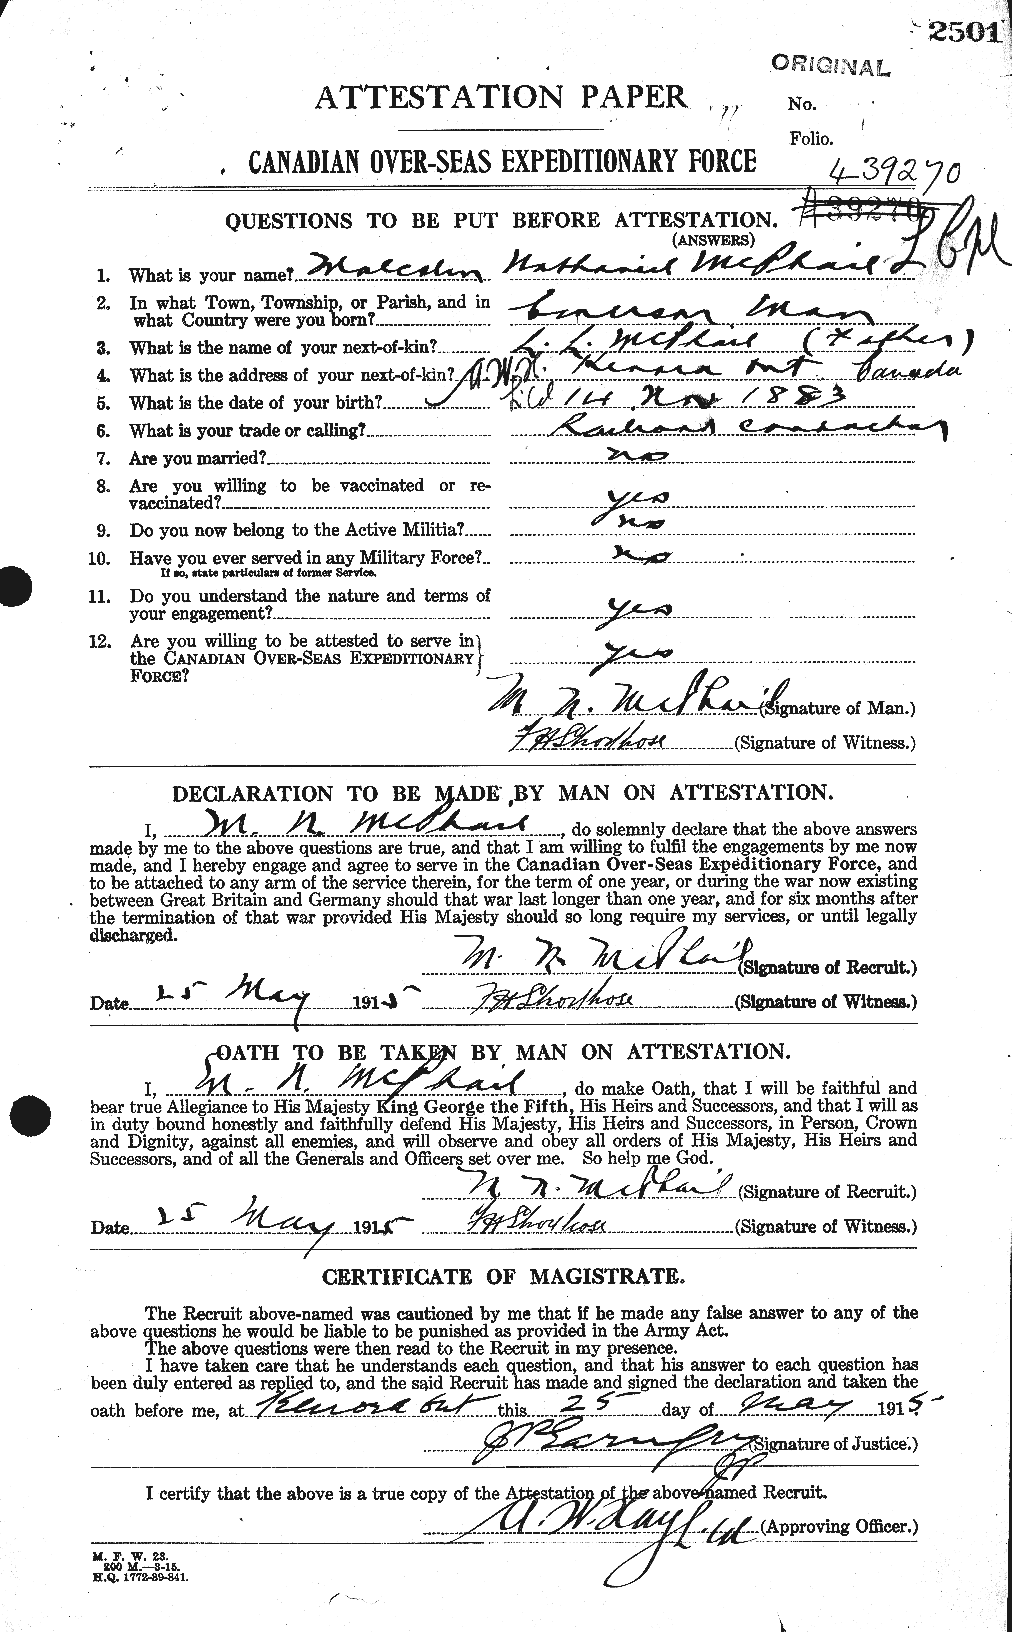 Personnel Records of the First World War - CEF 540892a